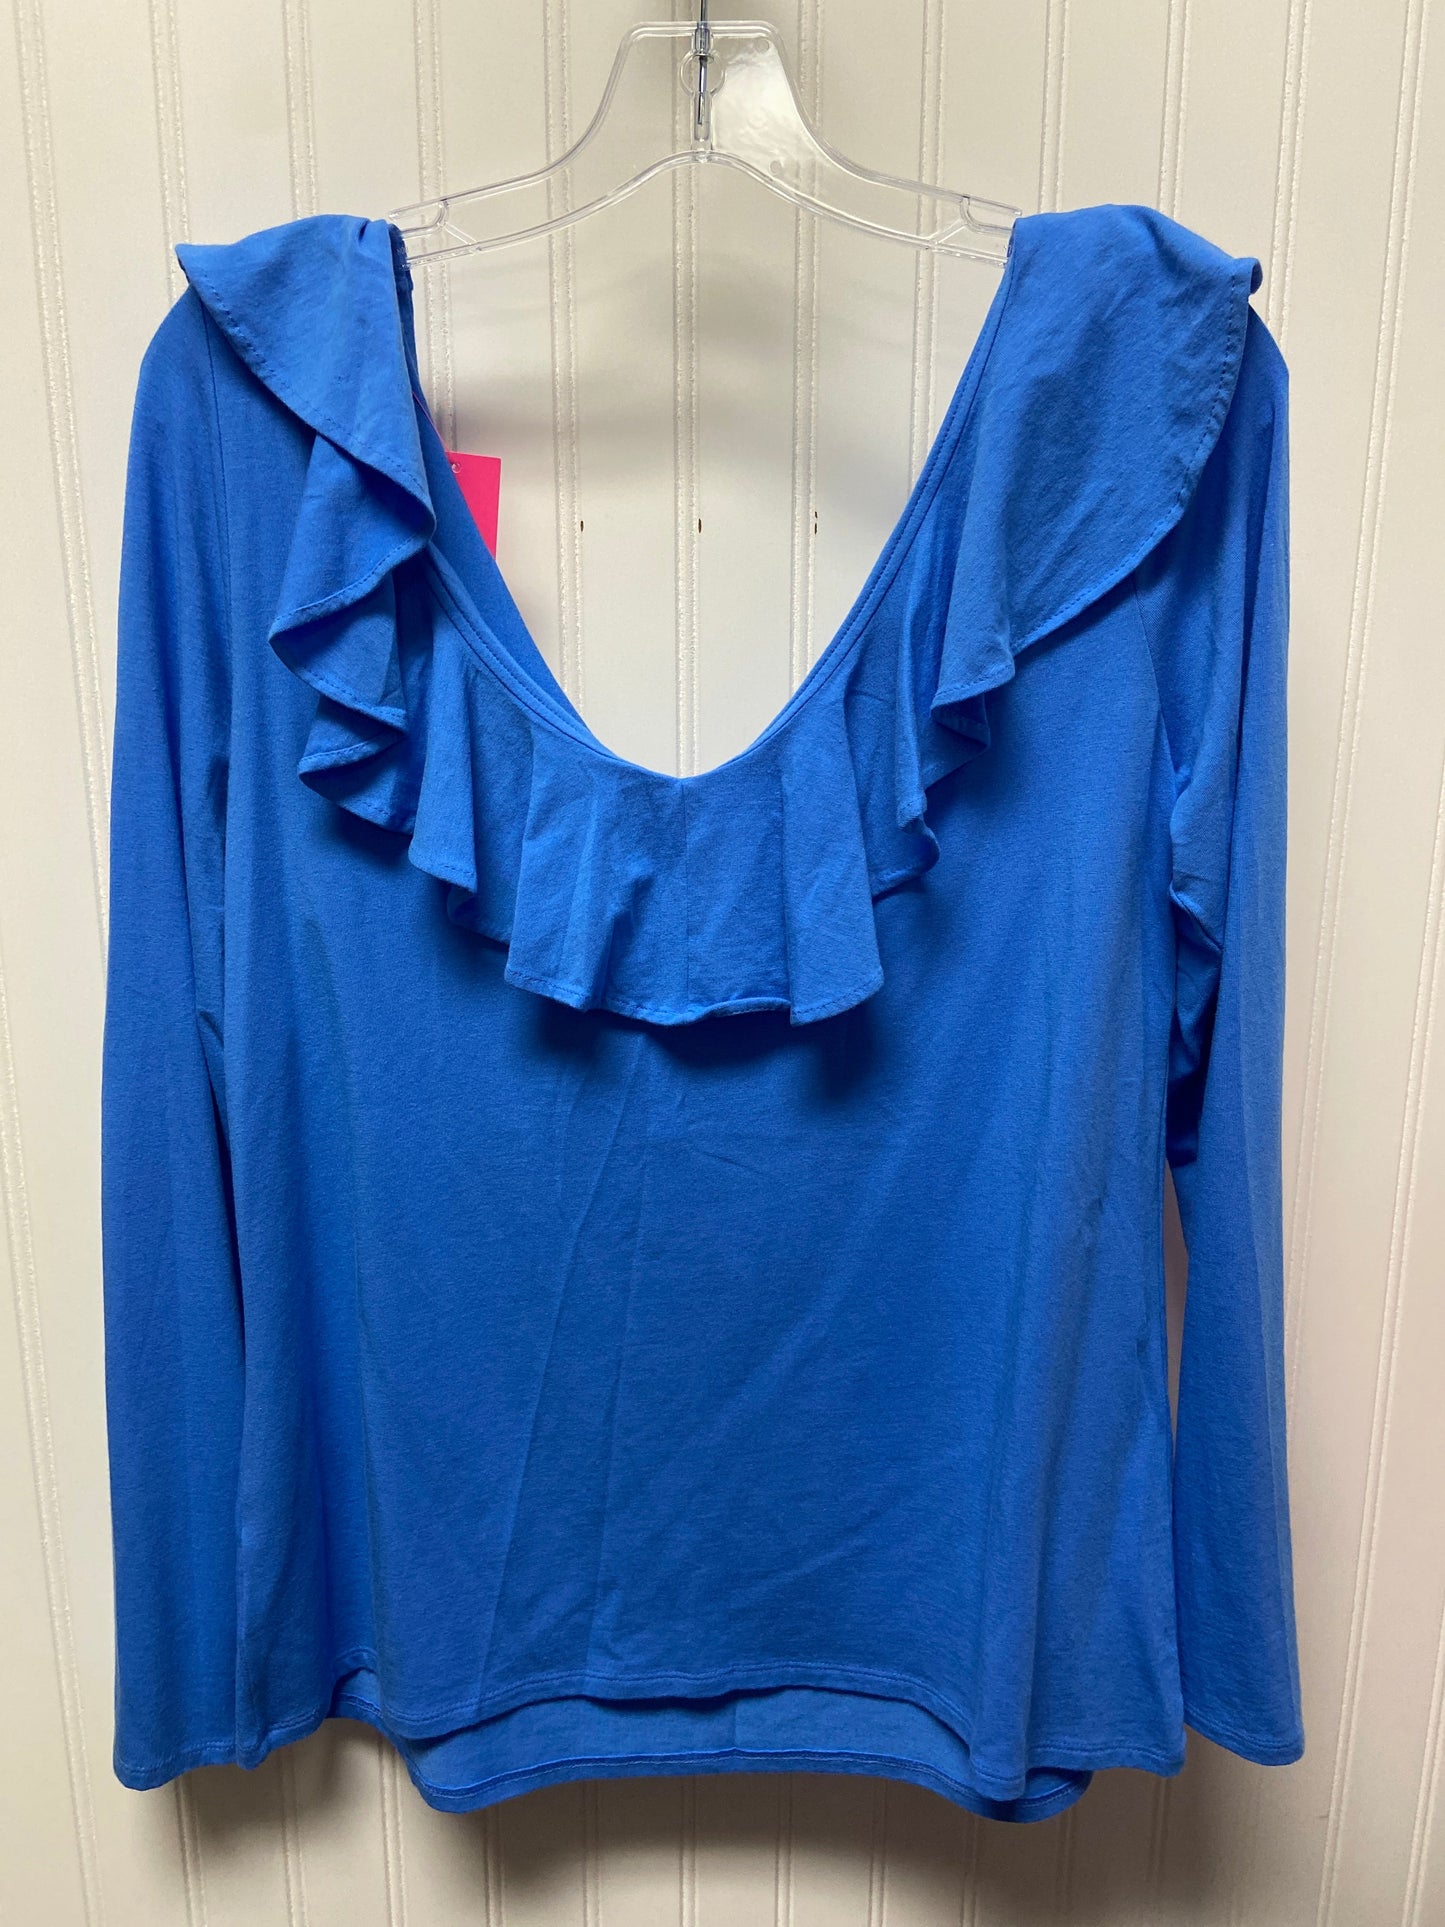 Blue Top Long Sleeve Designer Lilly Pulitzer, Size L